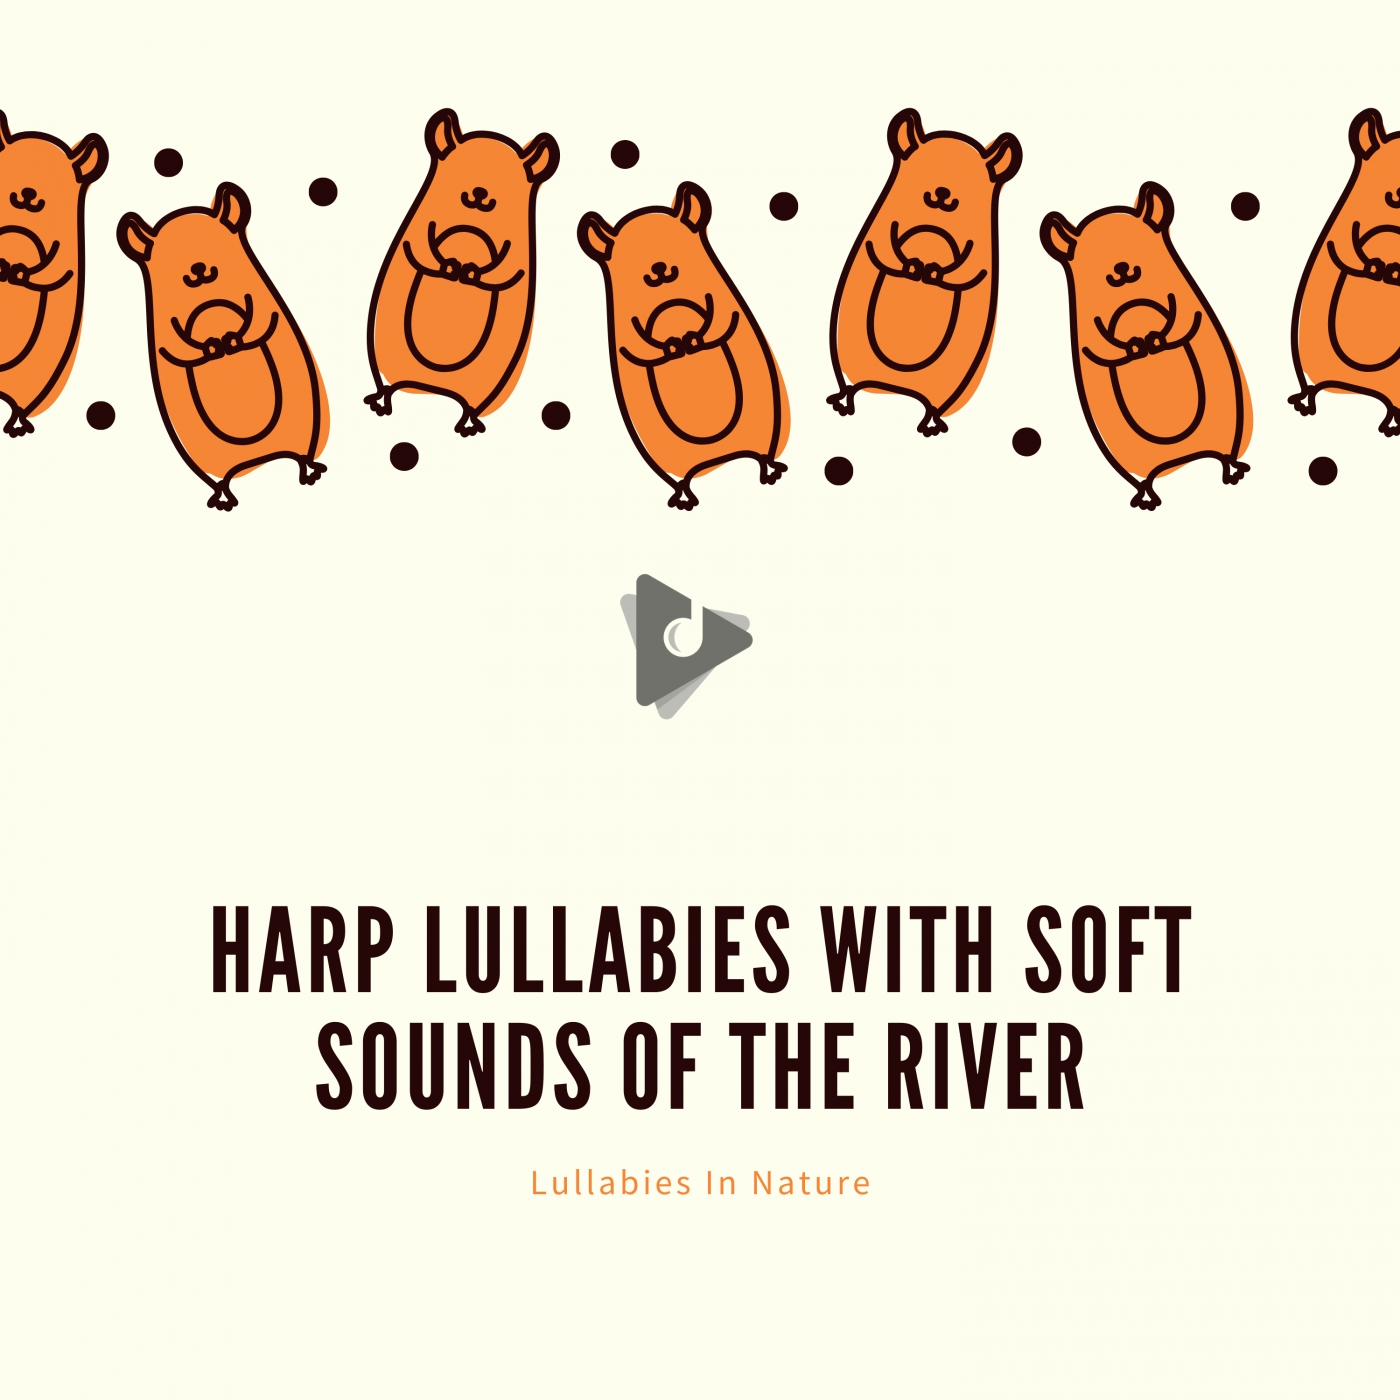 Harp Lullabies with Soft Sounds of the River